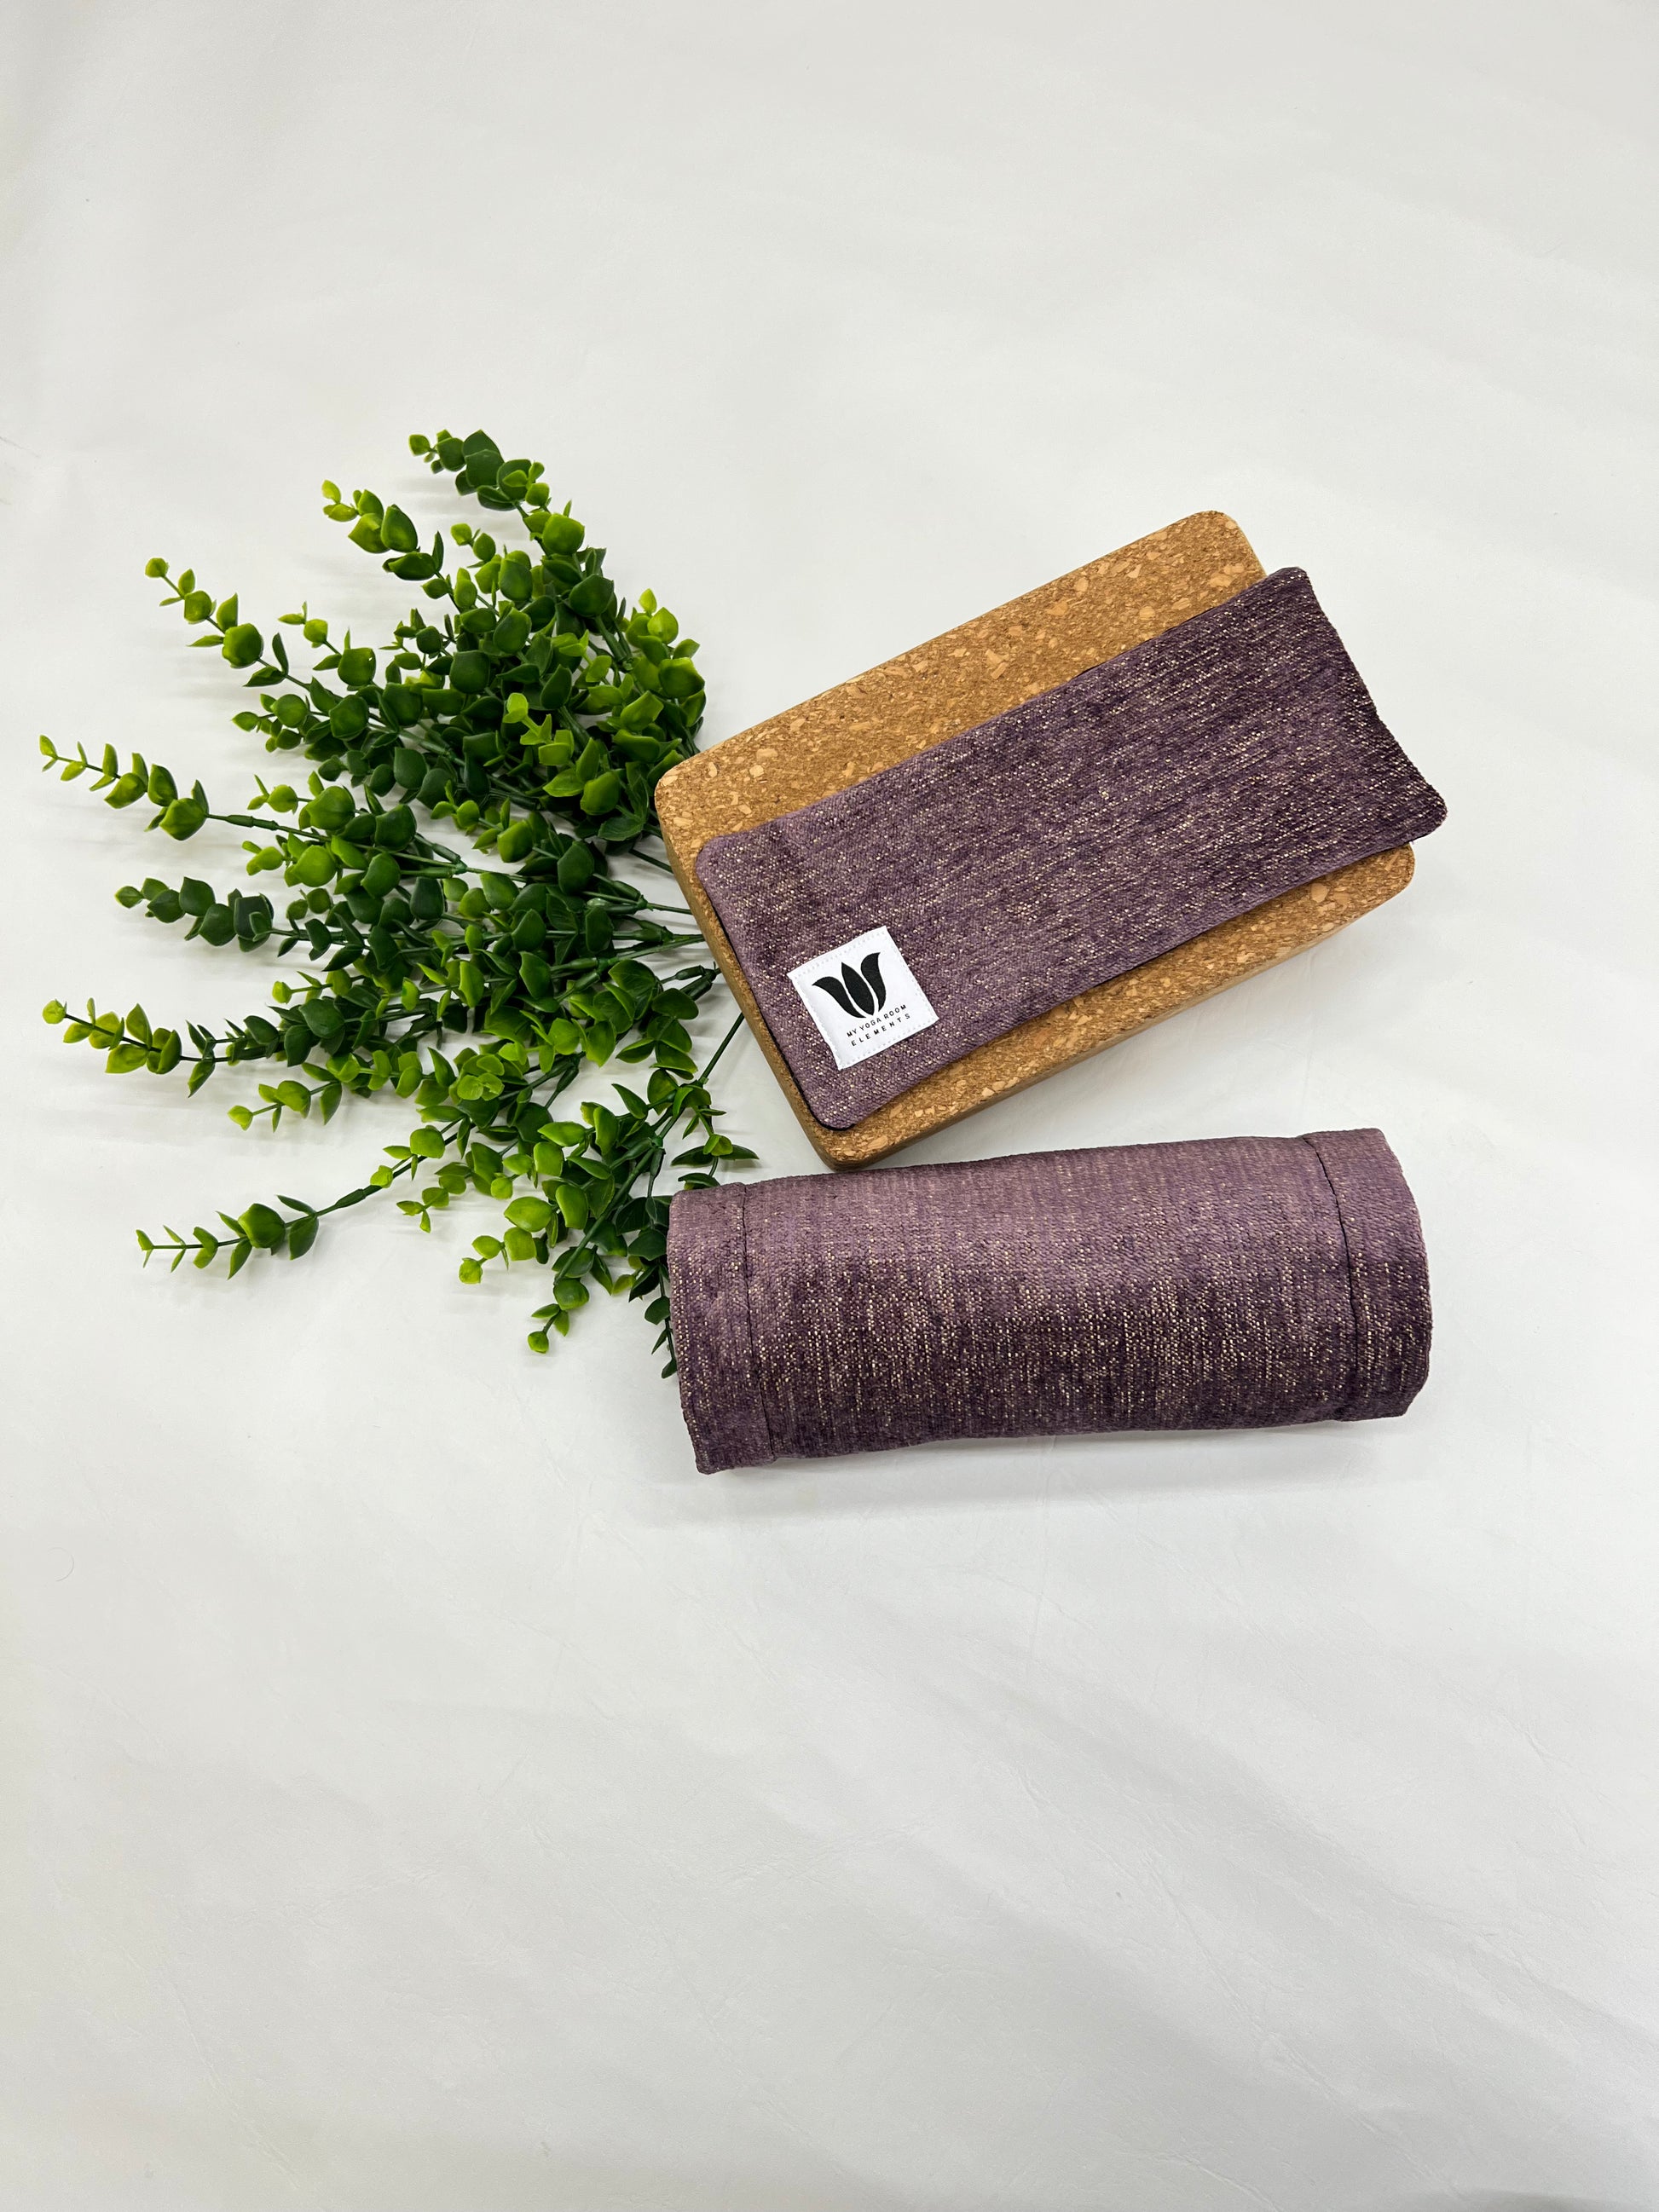 Luxury Gift Set rich purple plush fabric eye pillow and supportive neck roll.  Made in Canada by My Yoga Room Elements